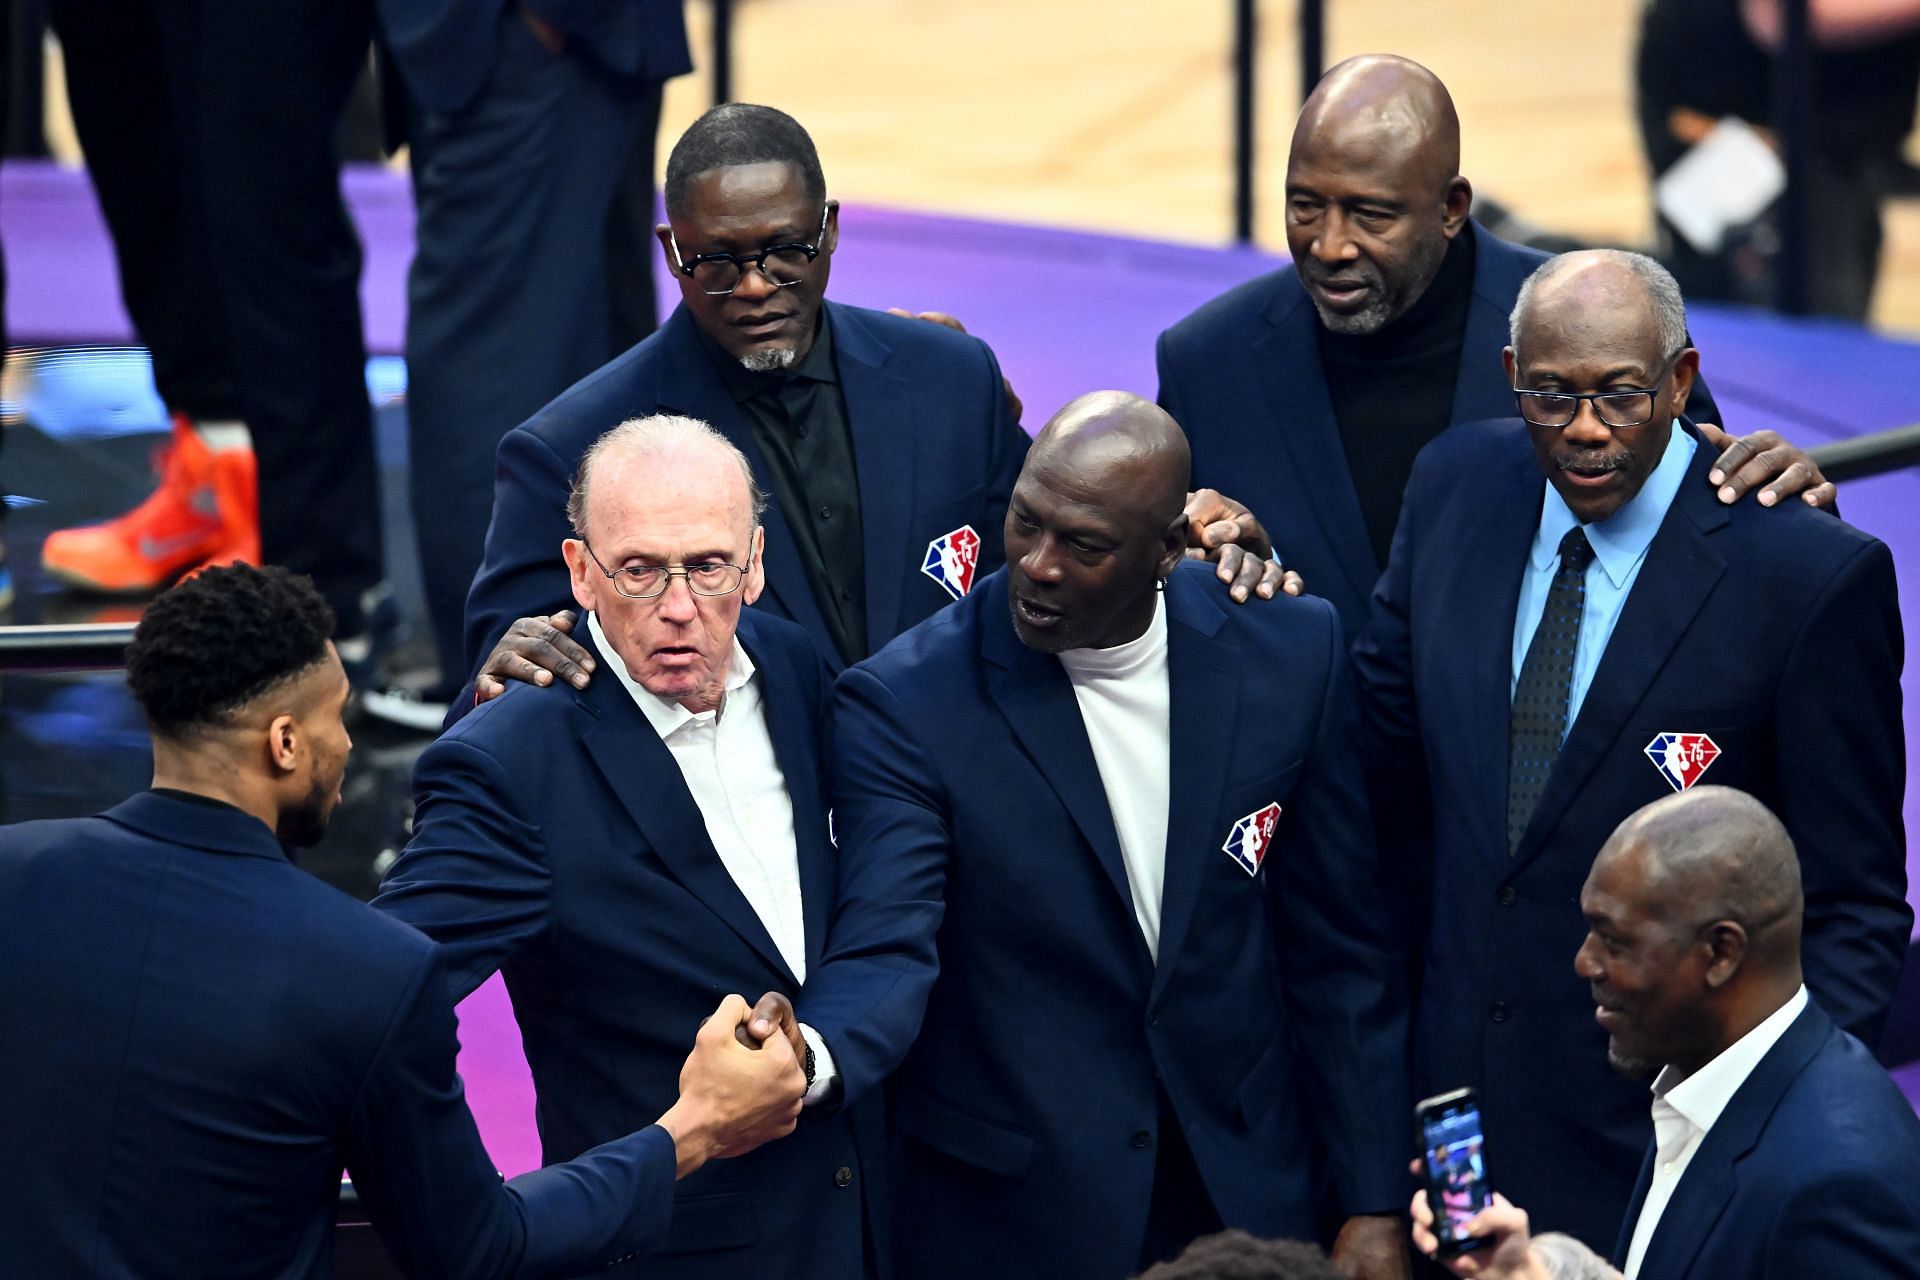 Michael Jordan with other NBA legends at the 2022 All-Star Game